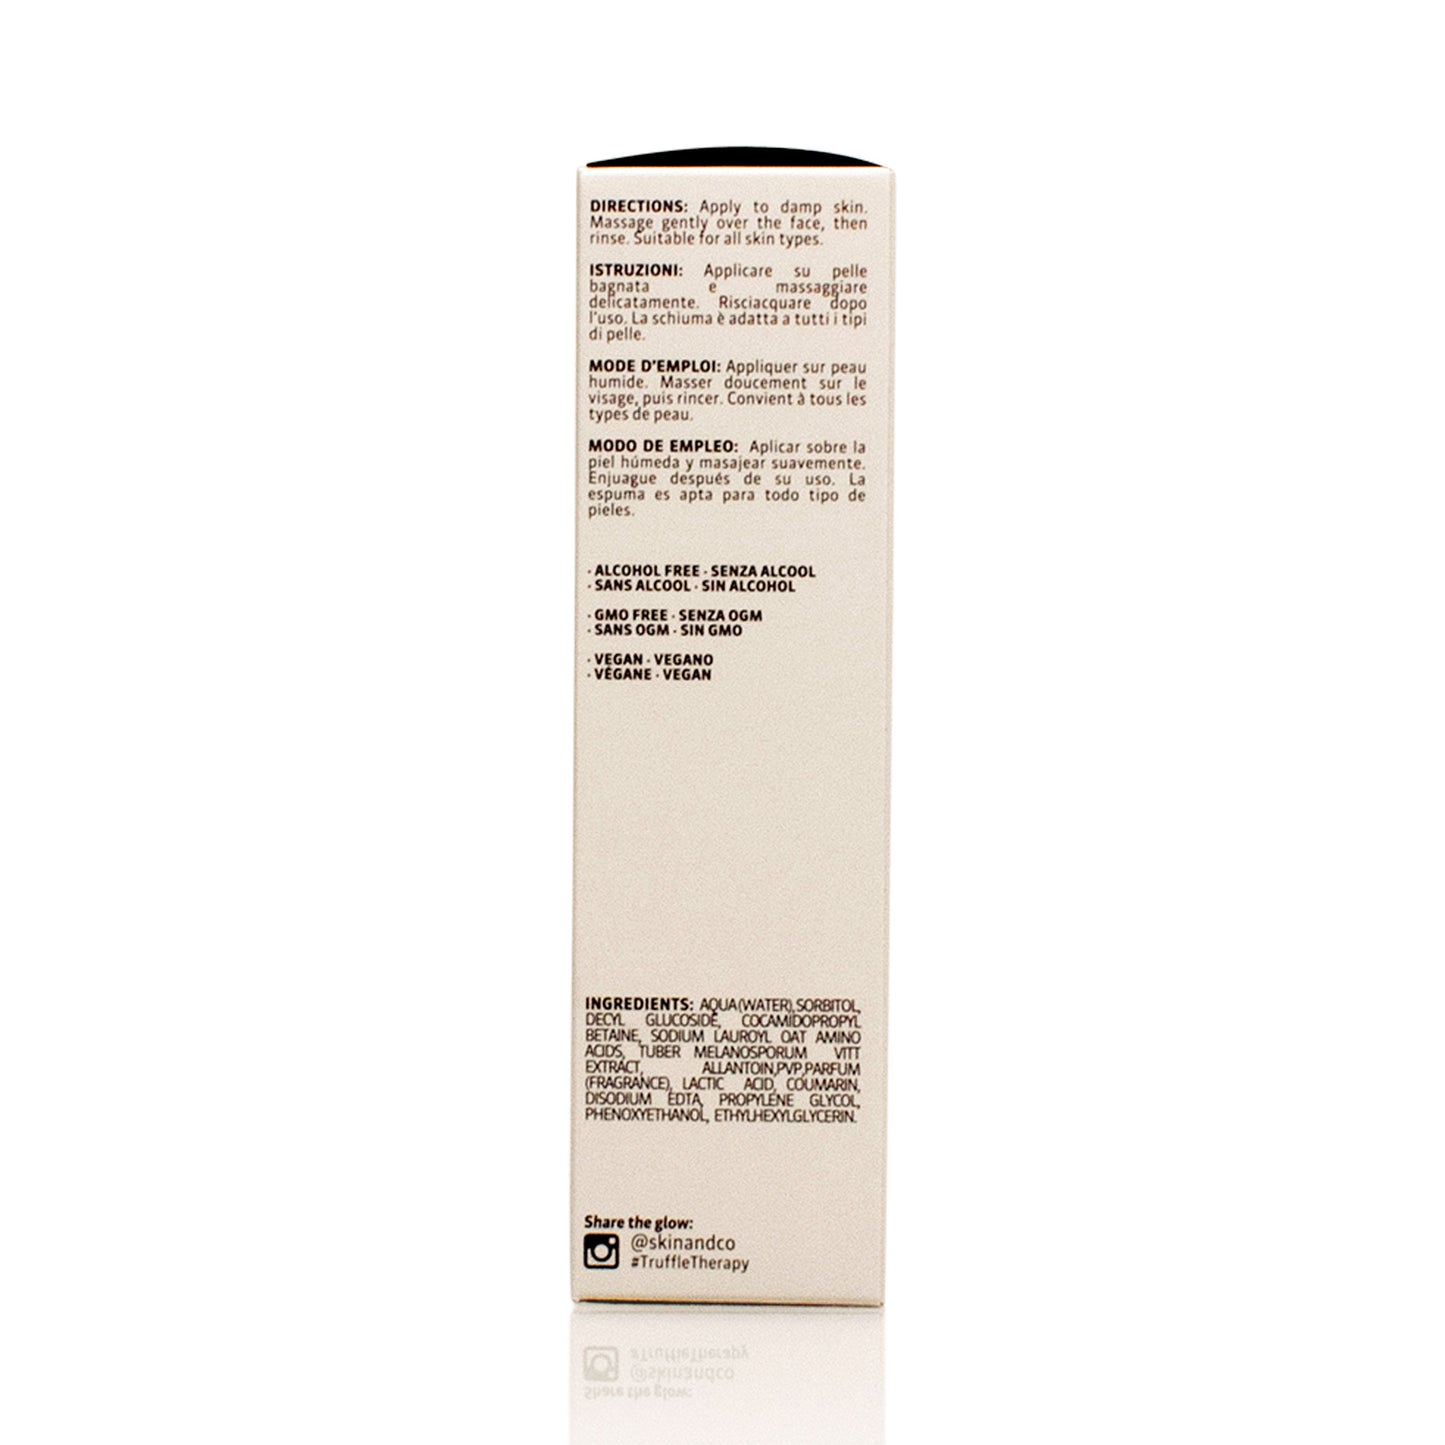 SKIN & CO TRUFFLE THERAPY CLEANSING FOAM 160 ml